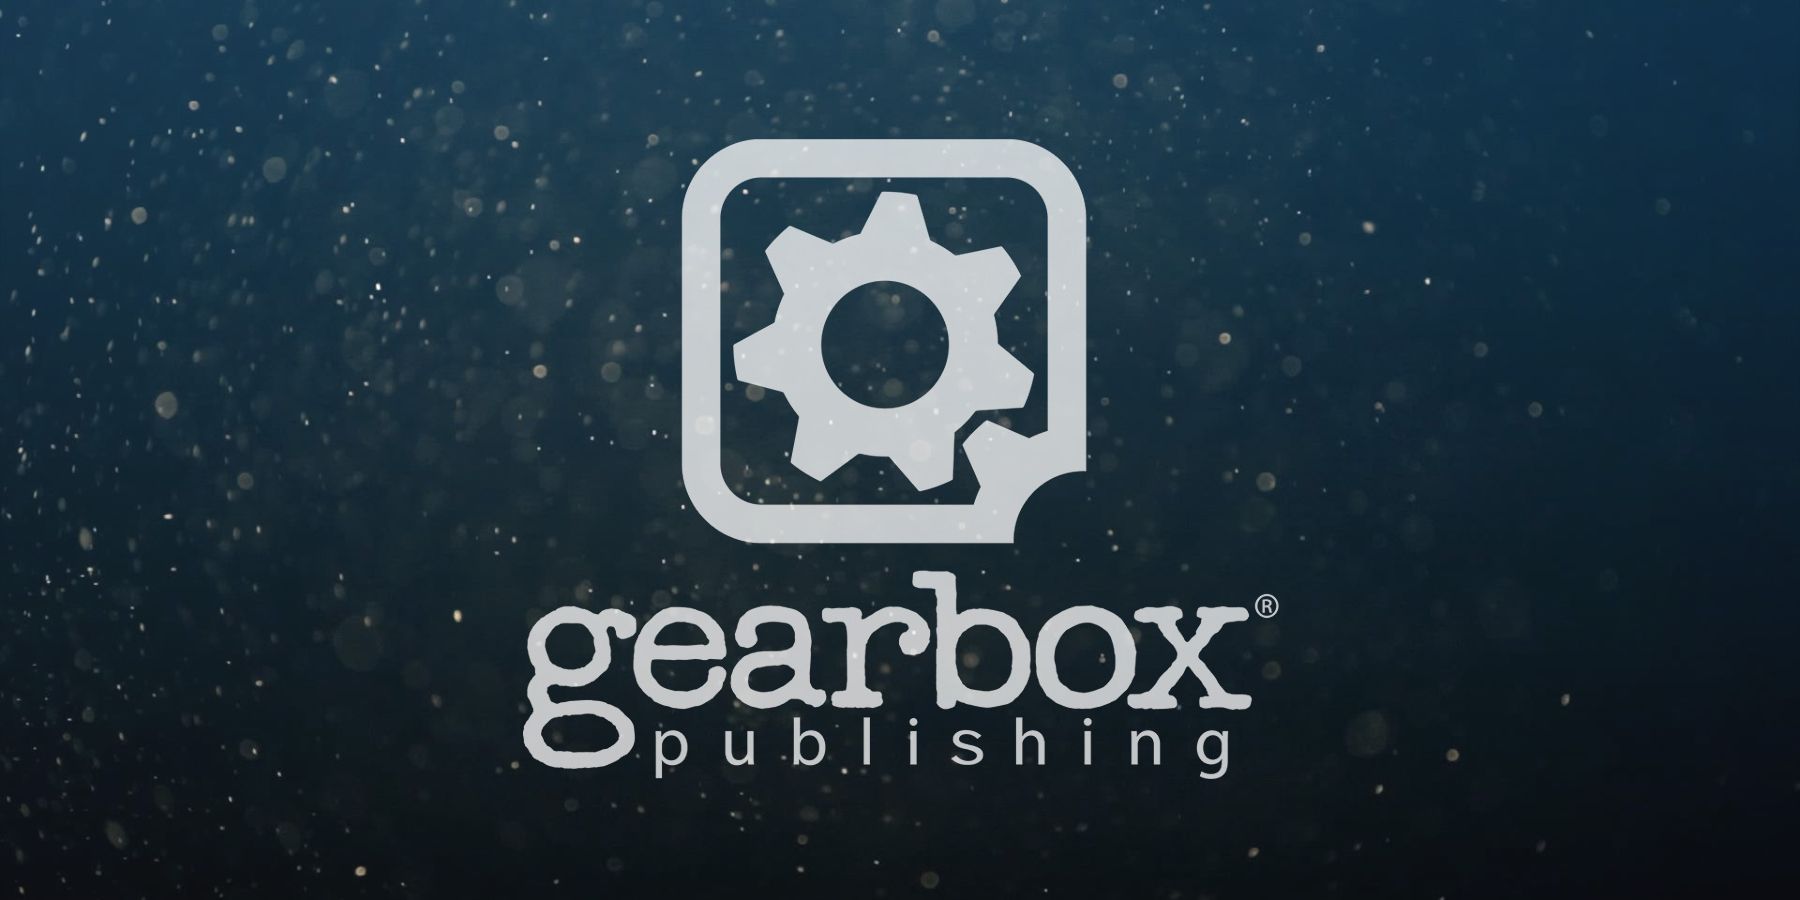 gearbox publishing logo snow background